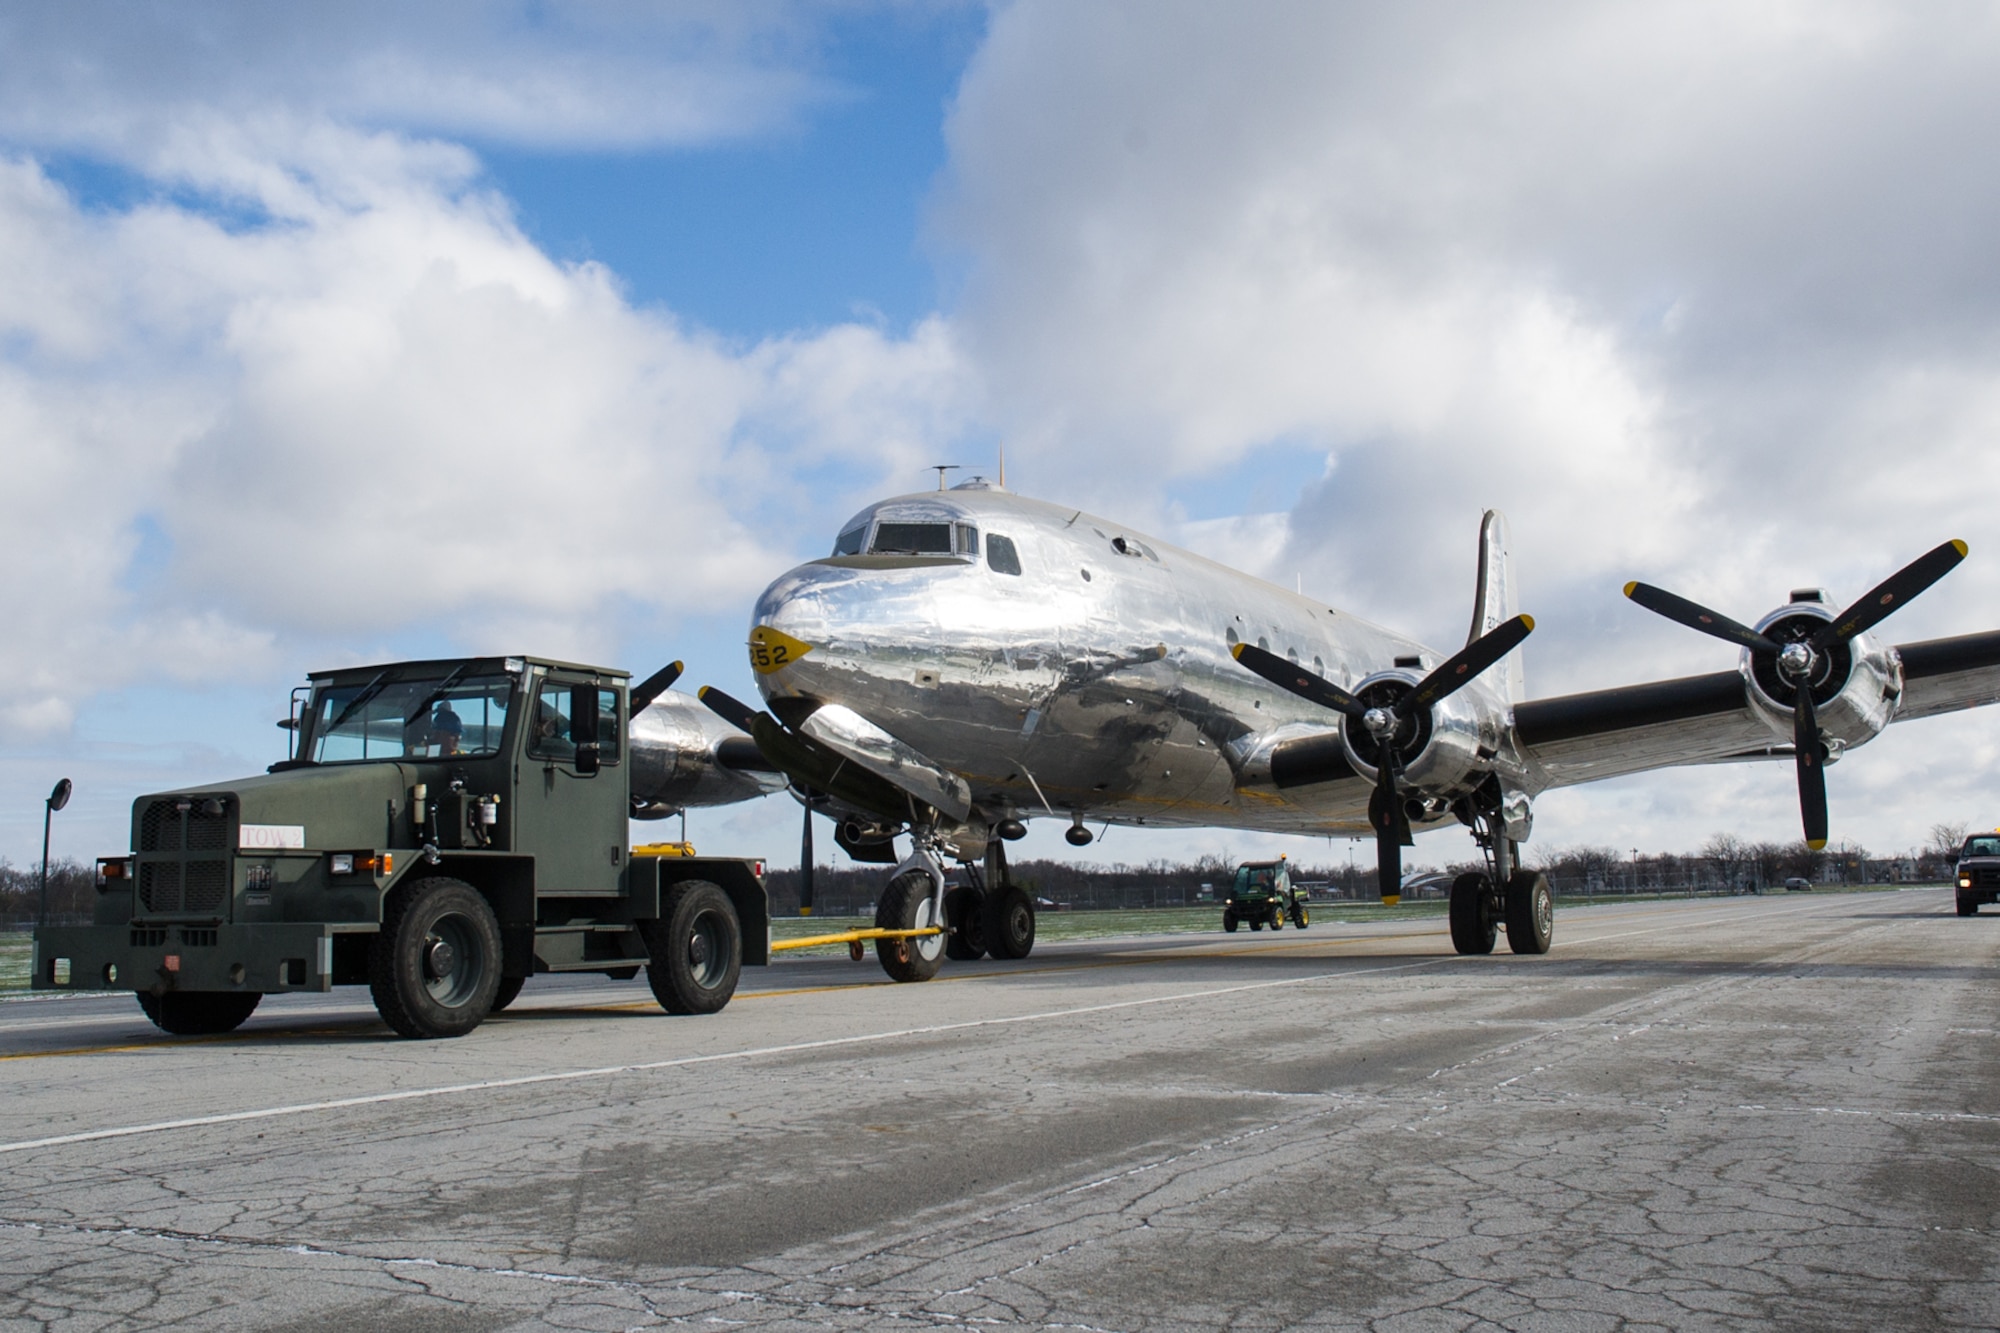 DAYTON, Ohio -- The VC-54C Sacred Cow being towed into the fourth building at the National Museum of the United States Air Force on April 9, 2016. (U.S. Air Force photo by Ken LaRock)